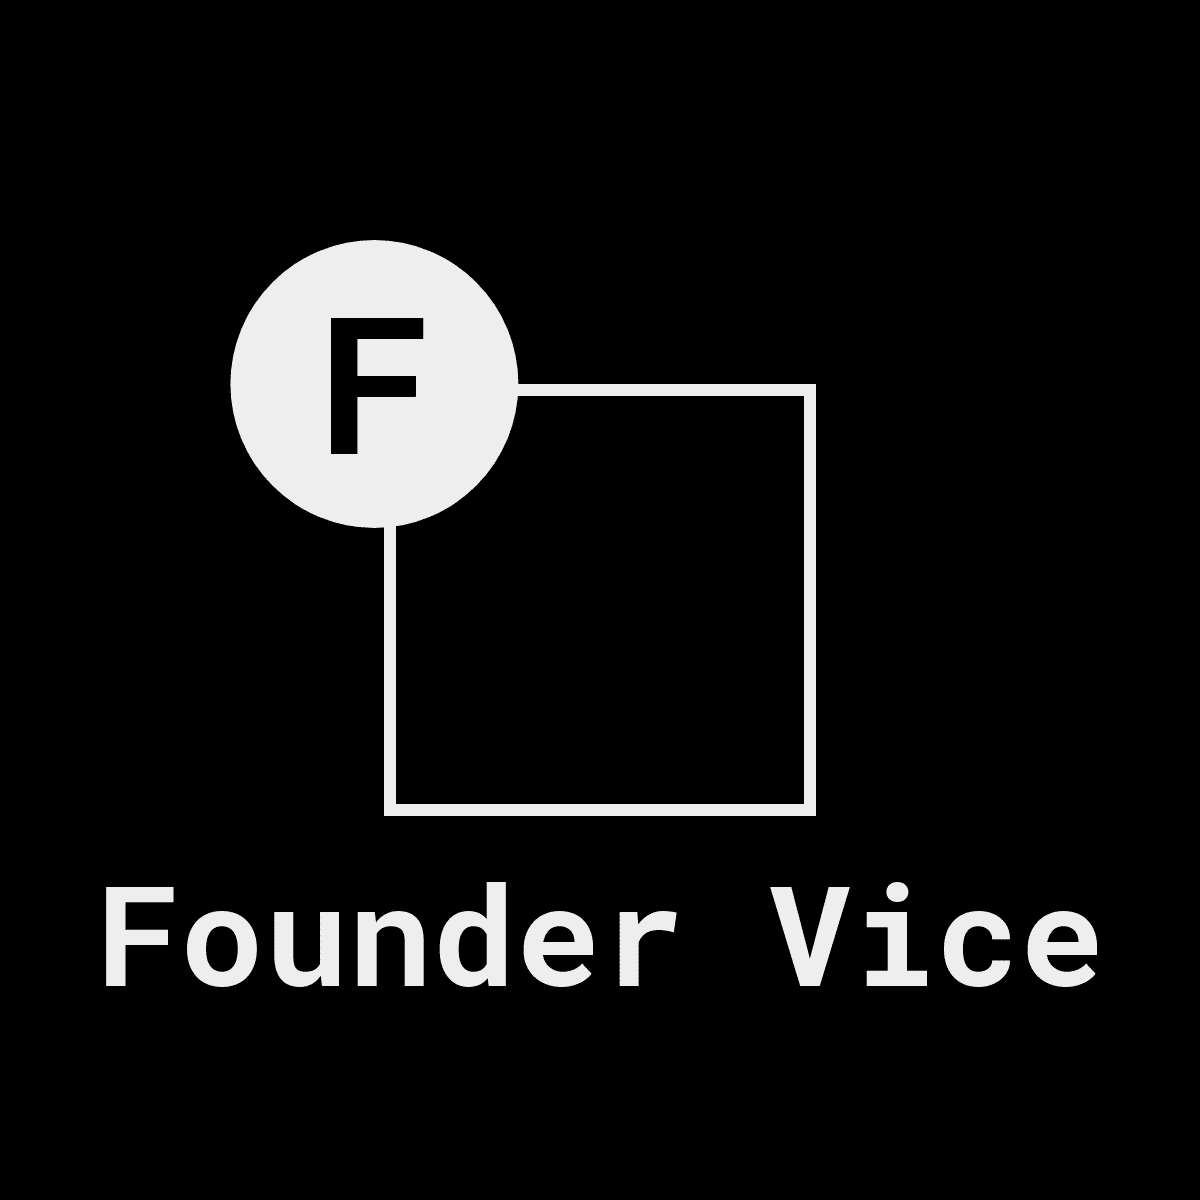 Founder Vice